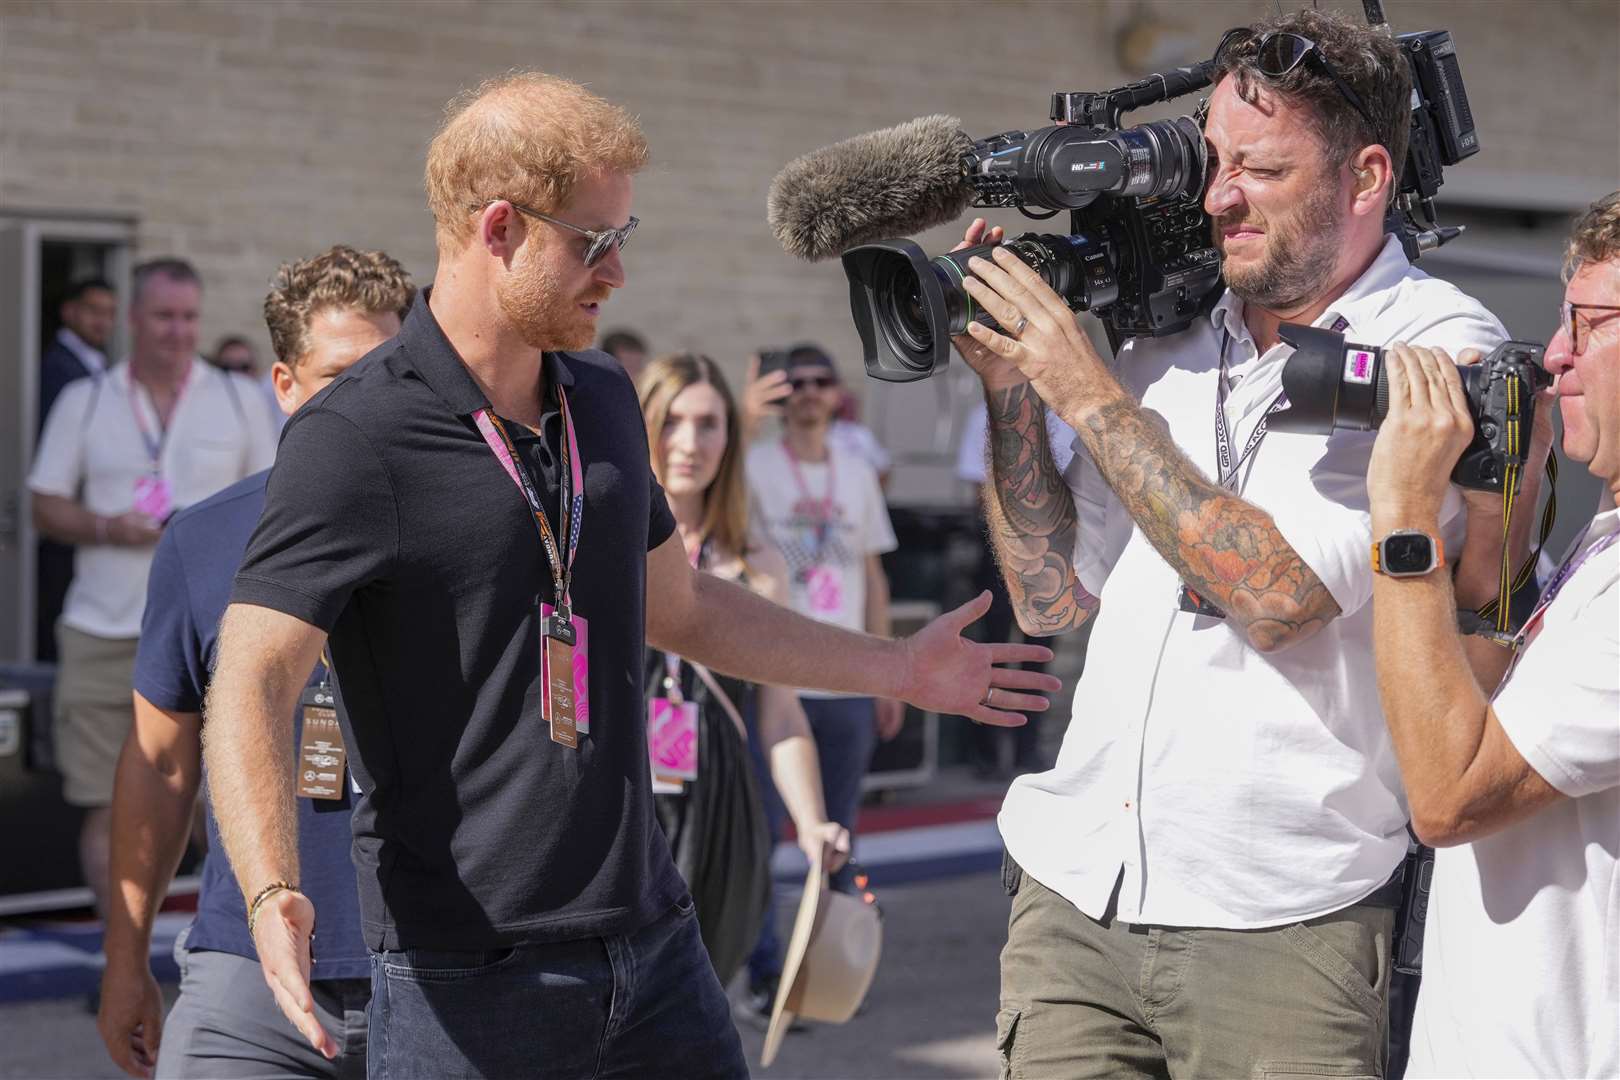 The Duke of Sussex conducts an interview during the Formula One US Grand Prix (Nick Didlick/AP)